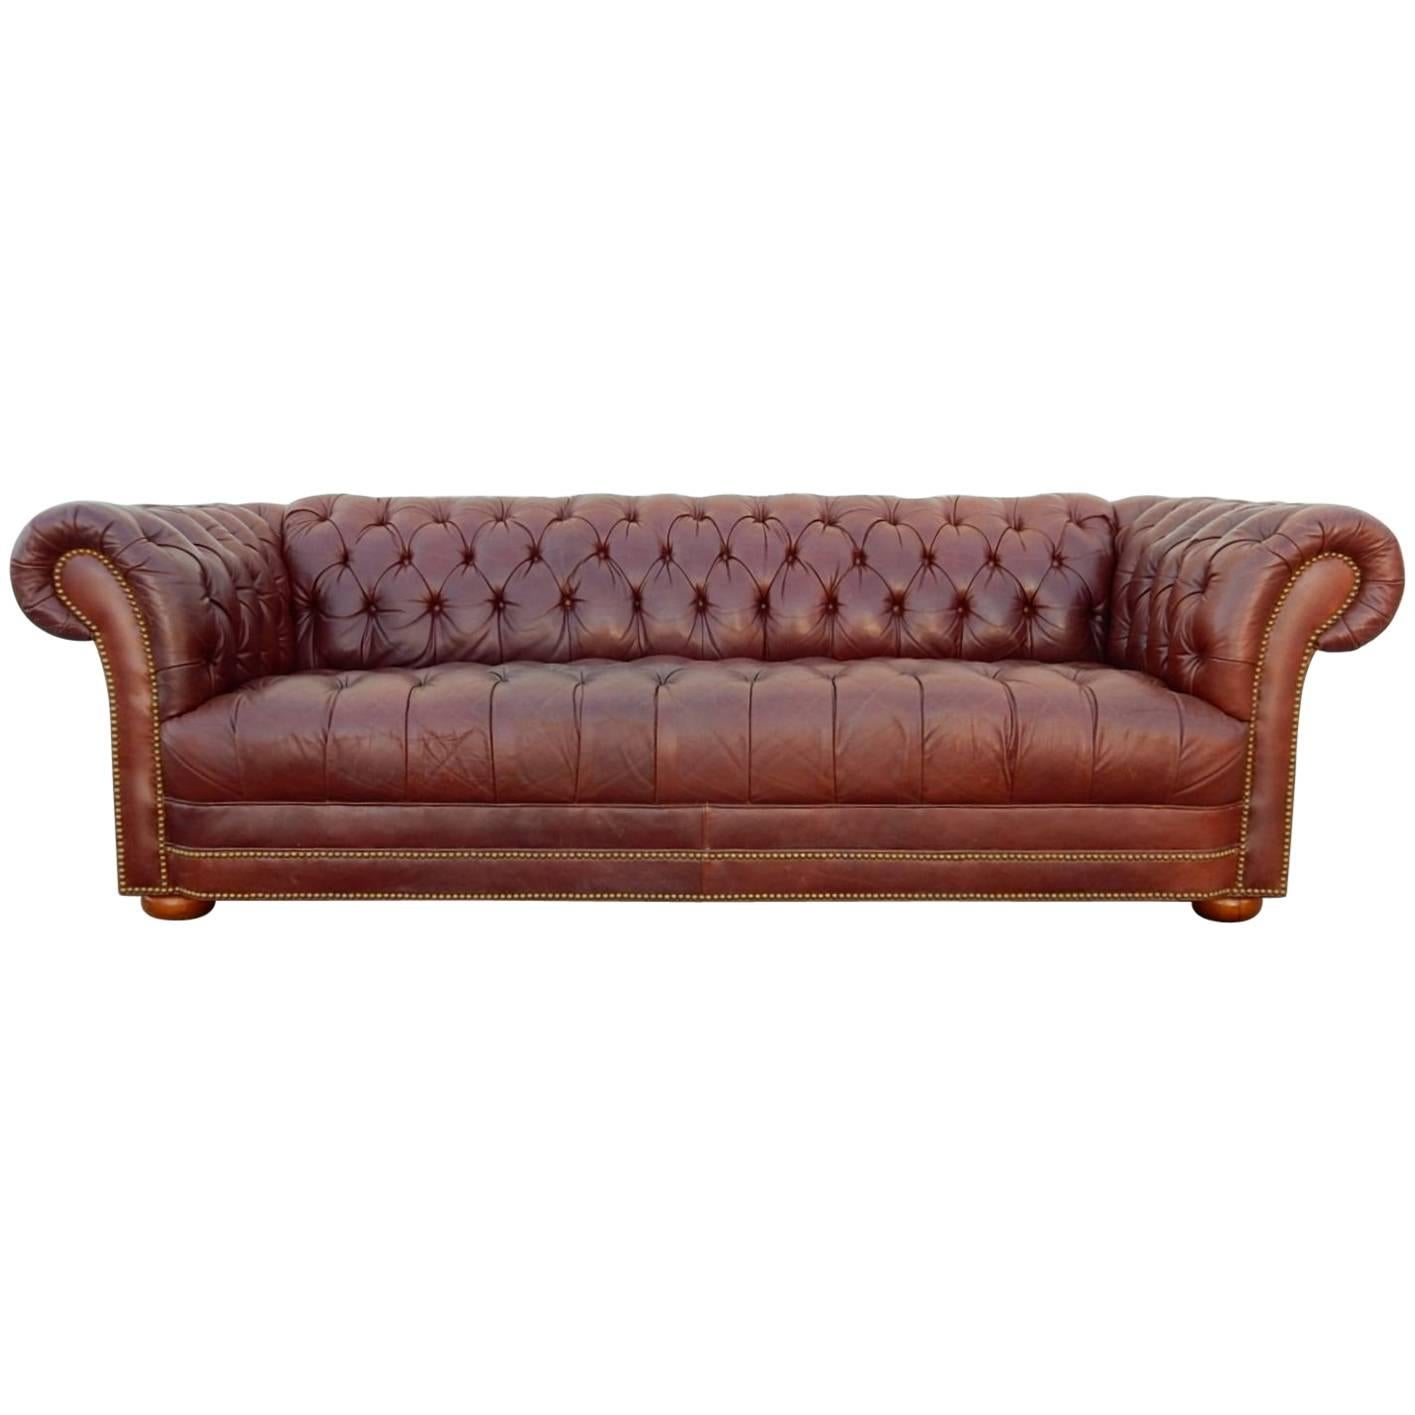 Vintage Distressed Oxblood Leather Chesterfield Sofa